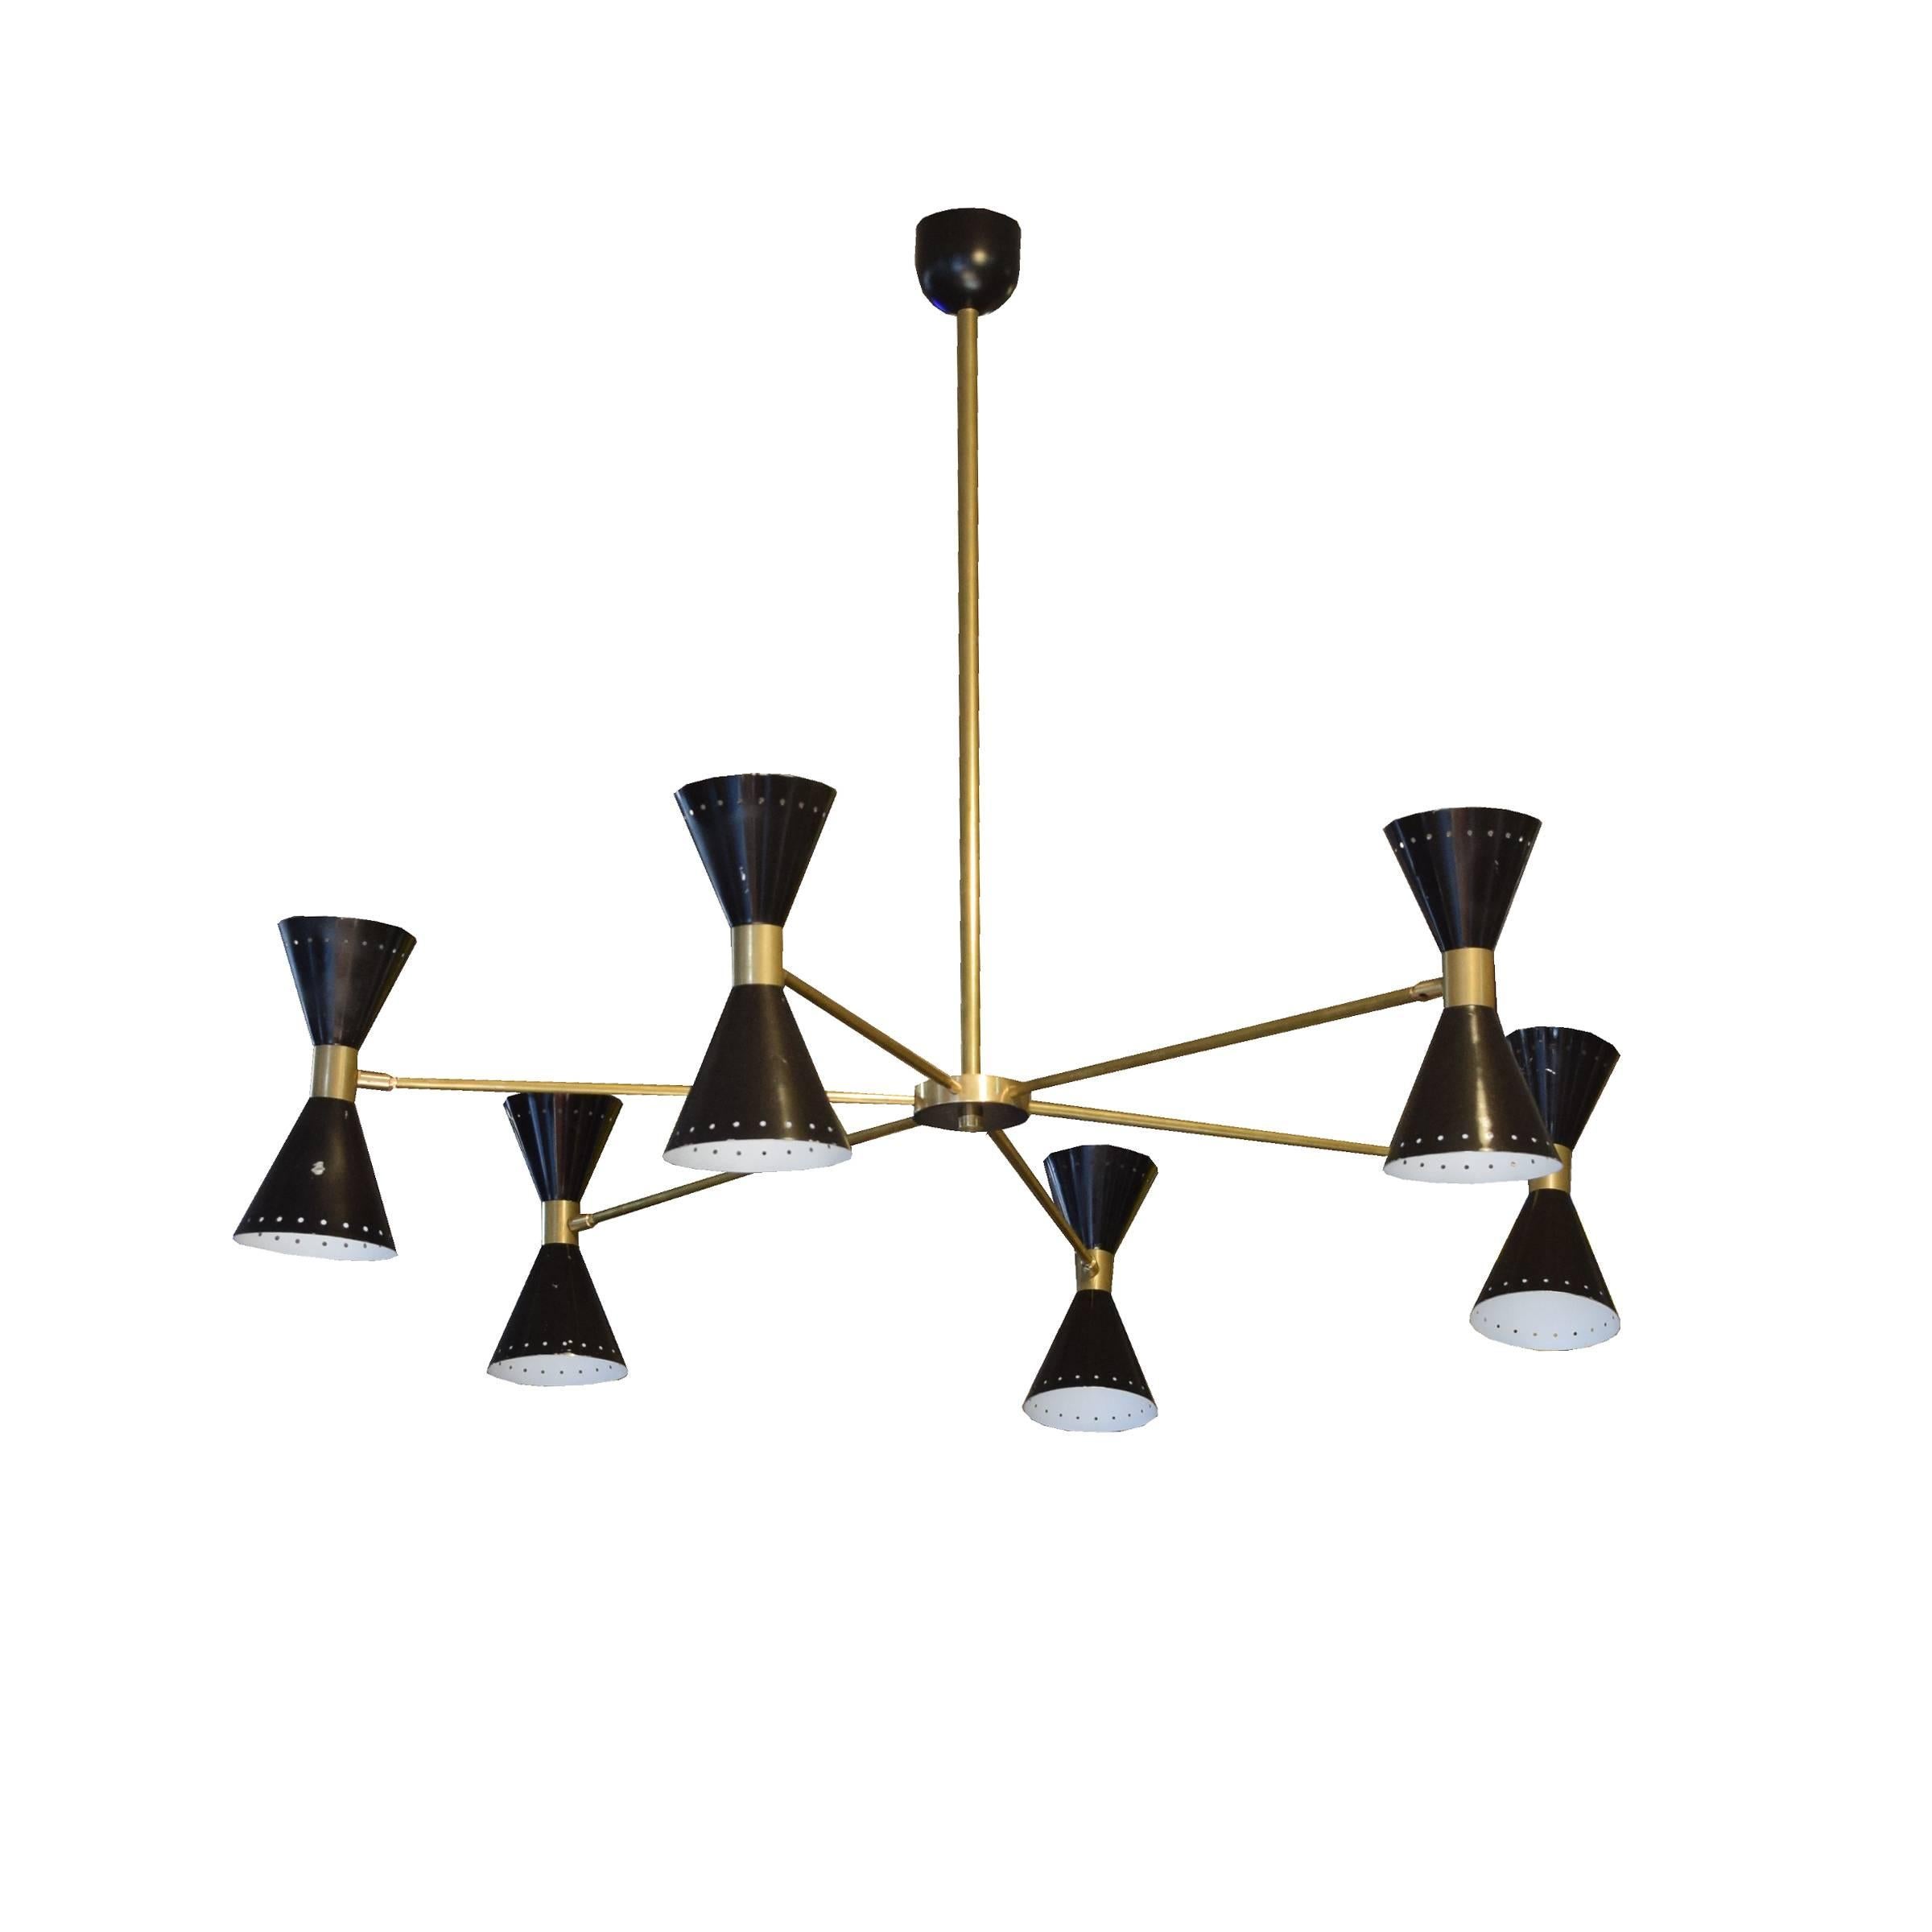 An Italian chandelier in the style of Stilnovo with a brass downrod and six brass arms ending in adjustable black enamel shades, each with up and down shining lights.
Requires re-wiring.